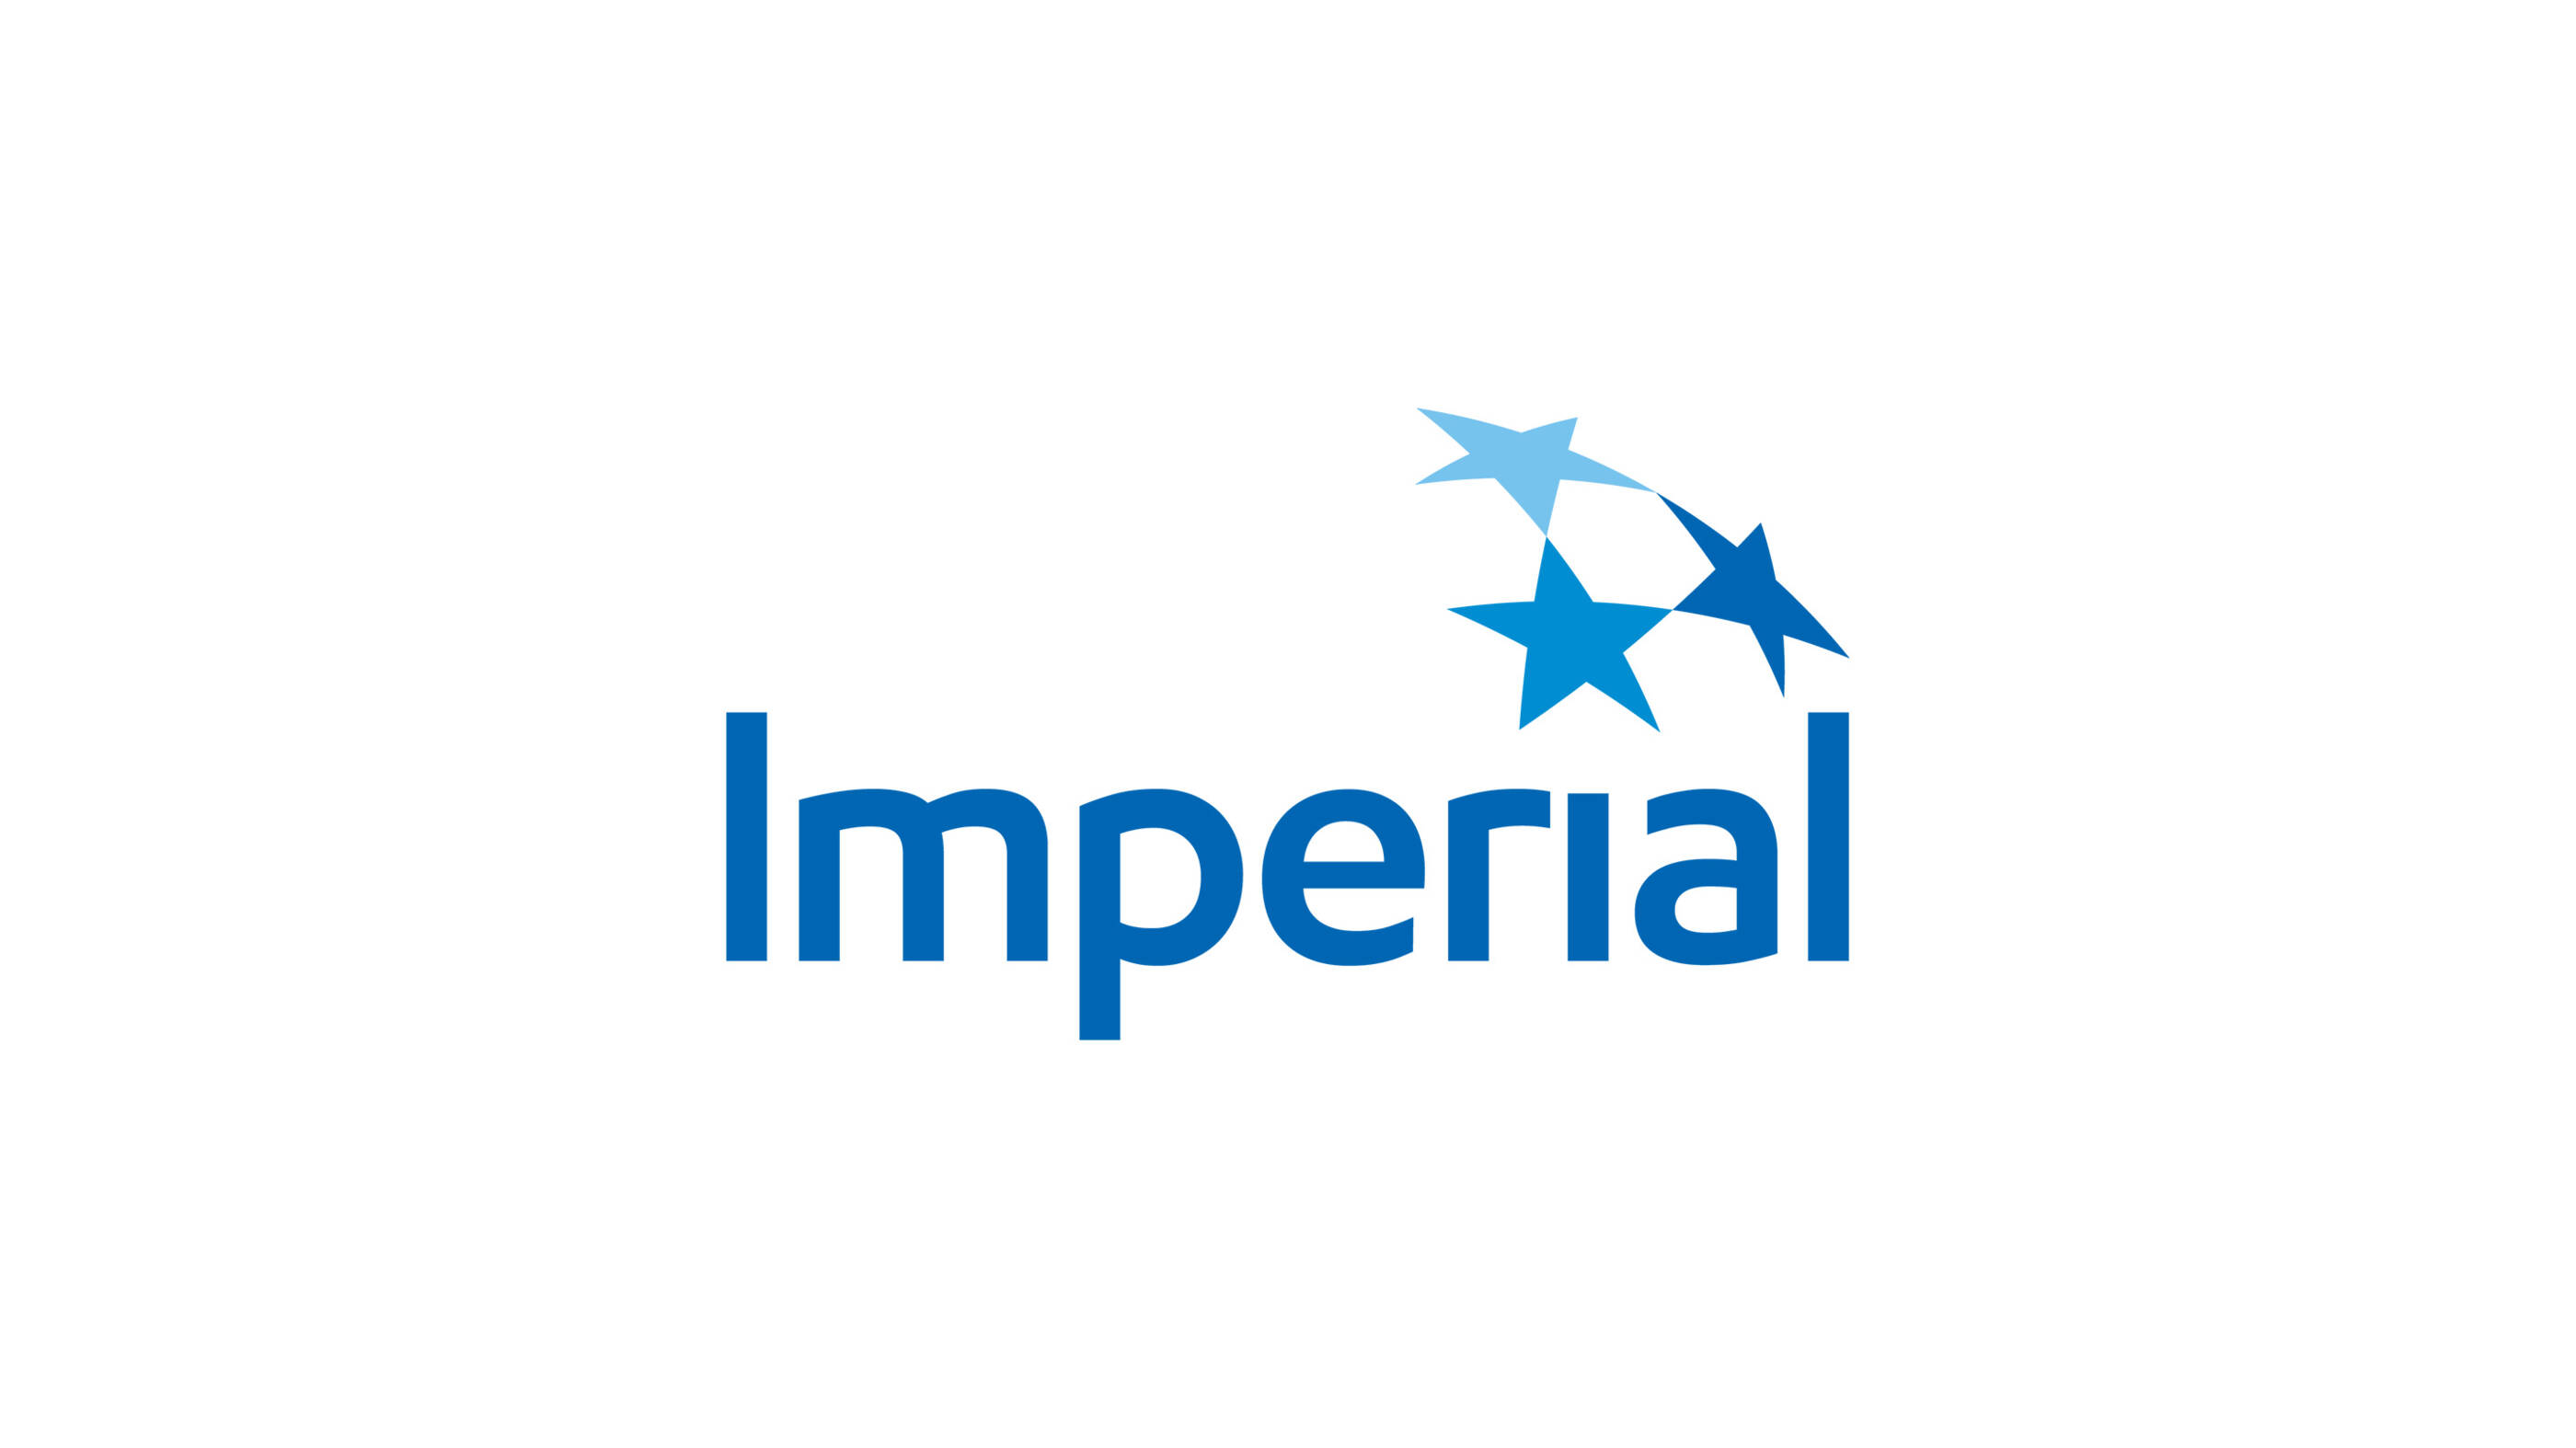 Imperial launches new corporate brand and logo.